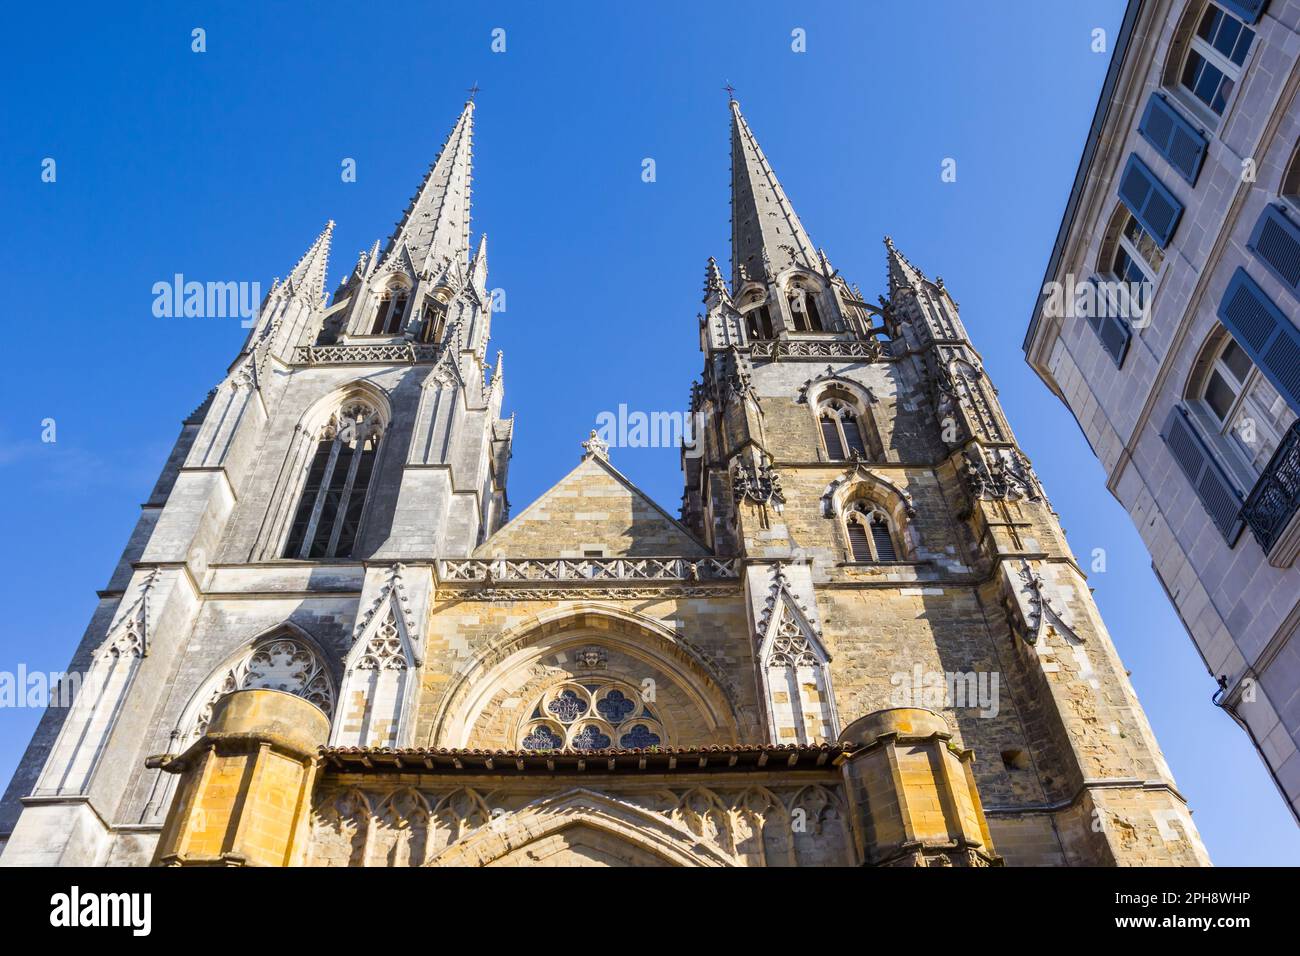 Towers of the historic cathedral of Bayonne, France Stock Photo